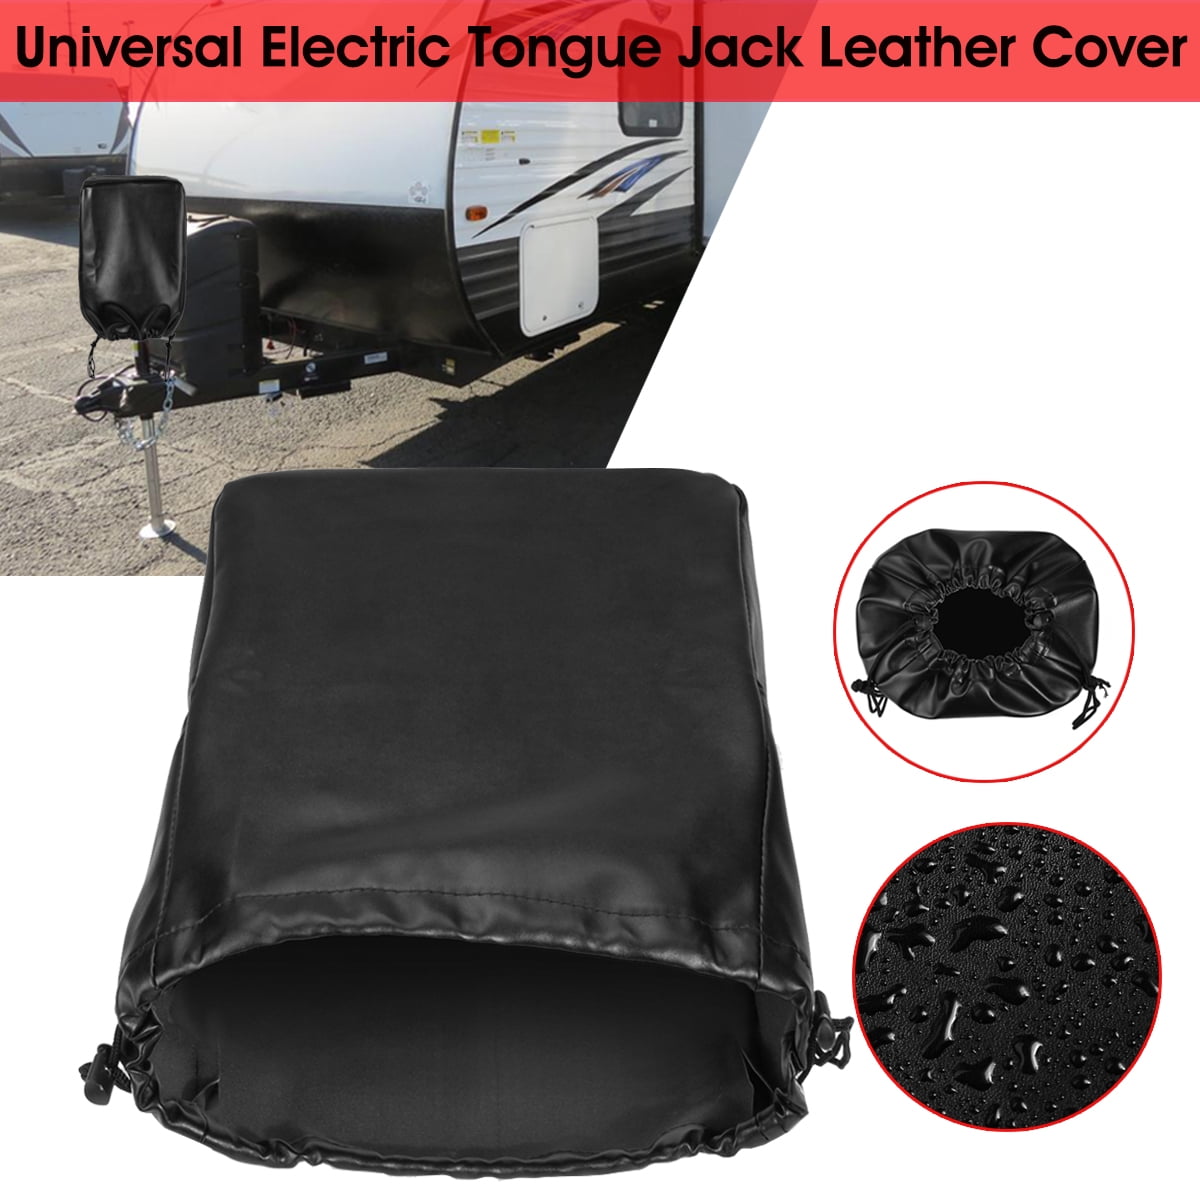 Universal Electric Jack Cover Camper Accessories for Travel Trailers Trailer RV Electric Tongue Protective Cover JJZ231 Waterproof Power Jack Cover 